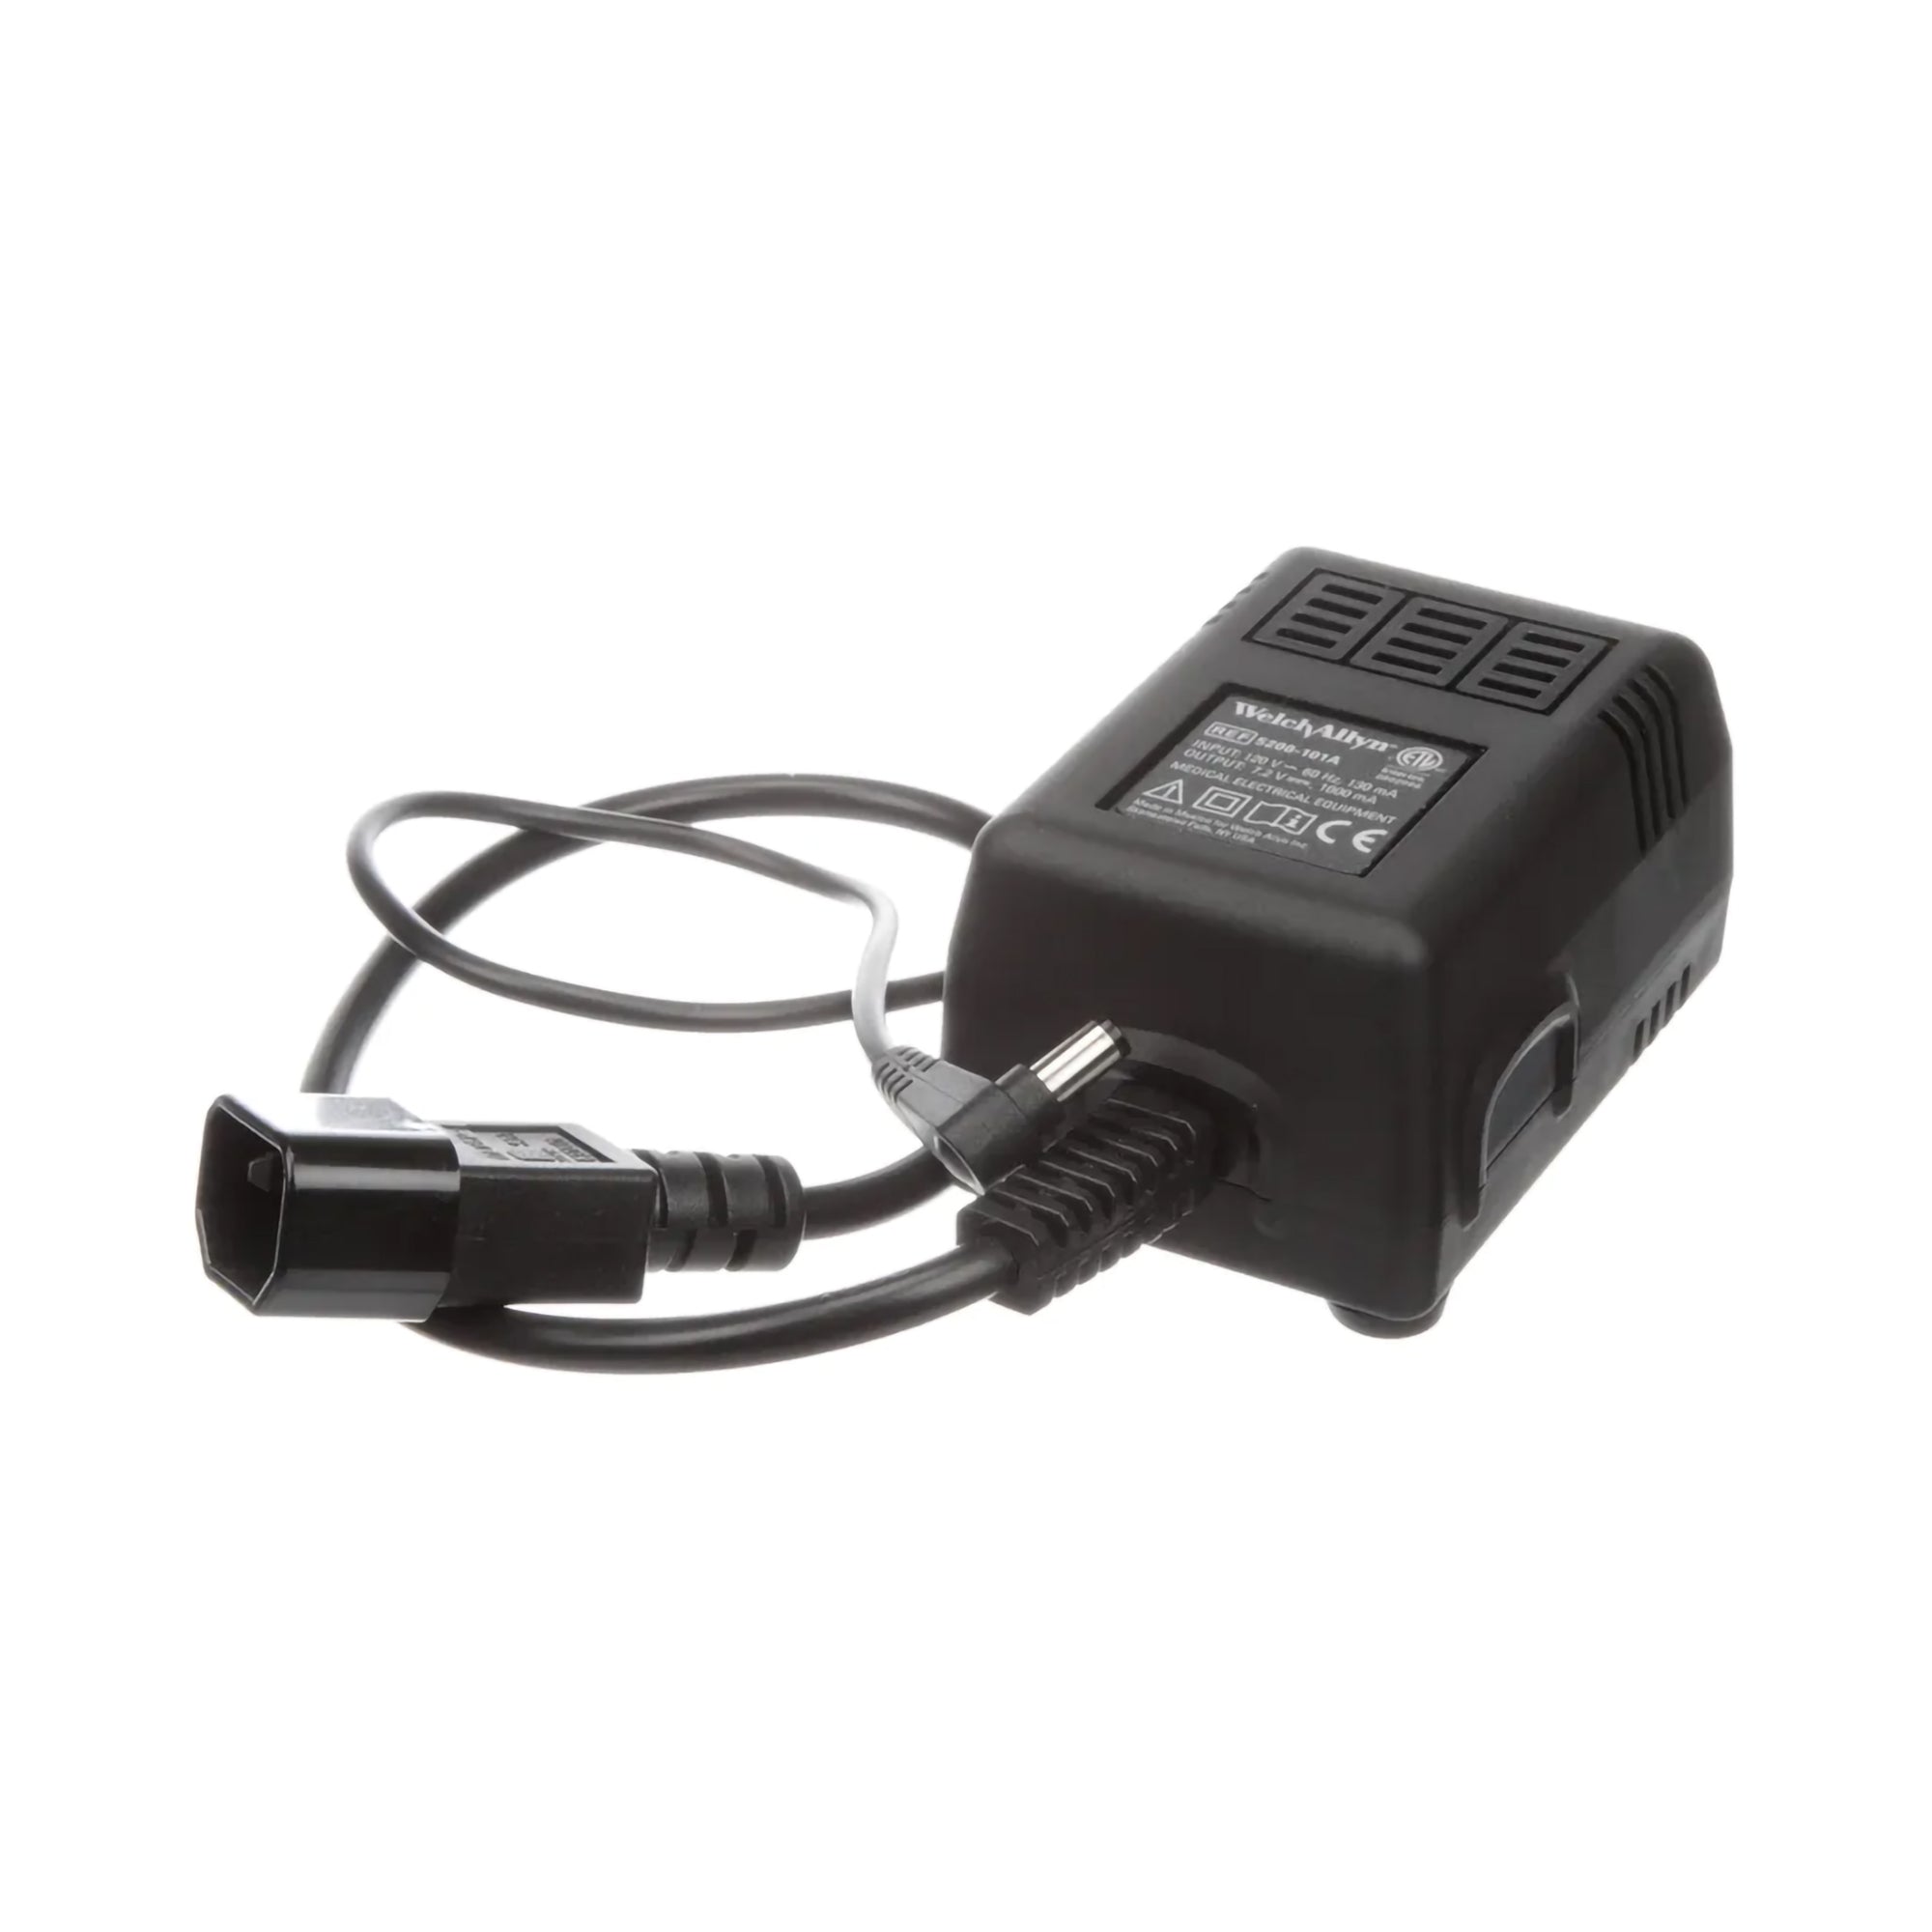 Welch Allyn 120V AC Power Transformer for Spot Vital Signs Devices